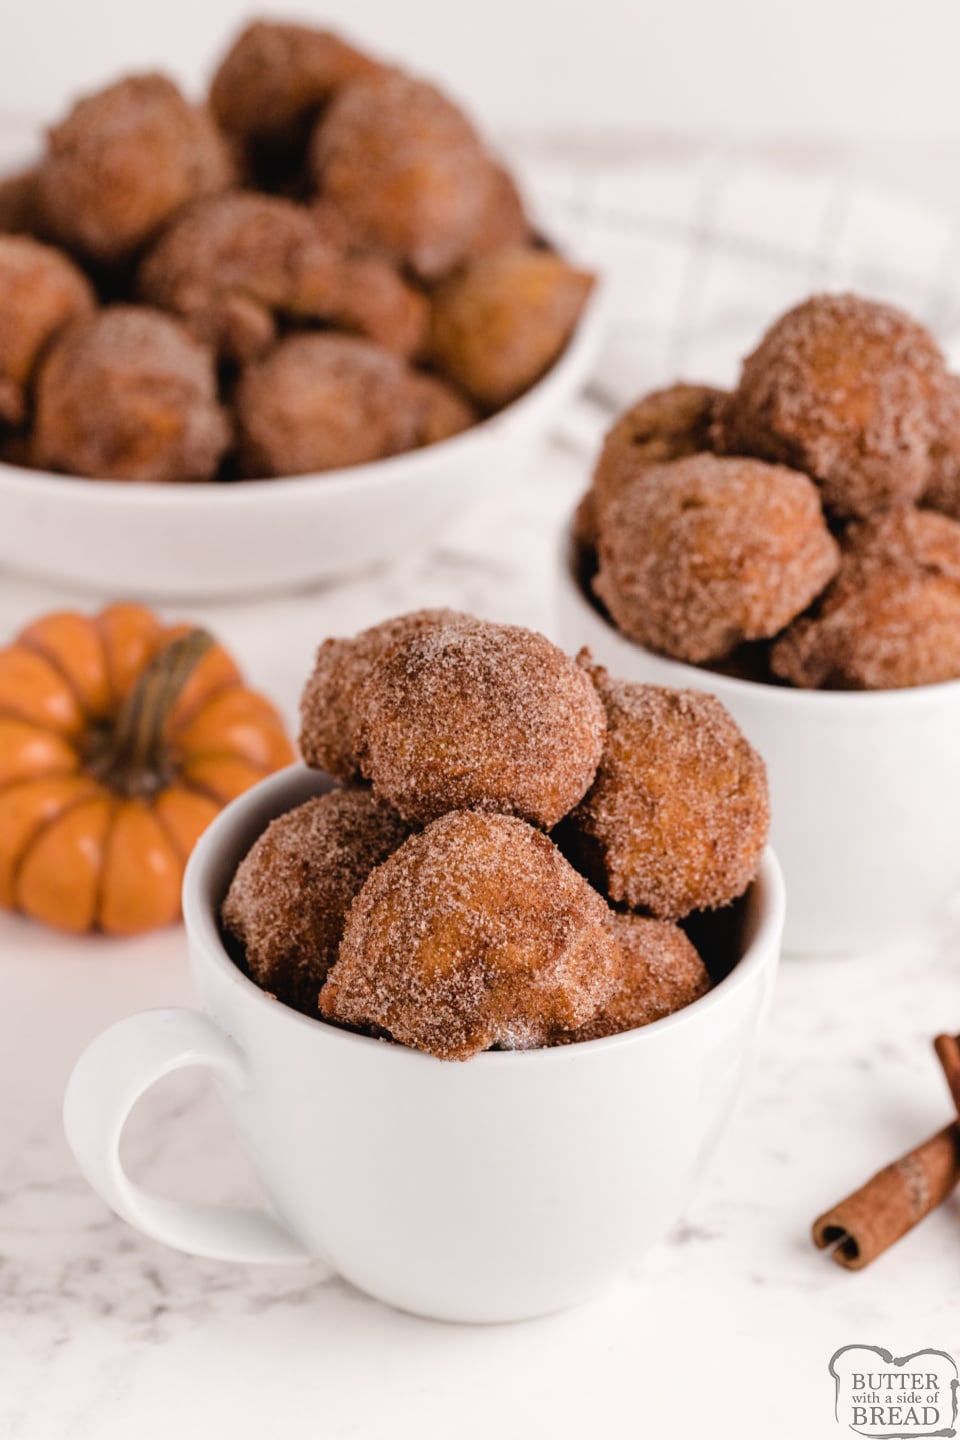 Pumpkin Donut Holes are soft, delicious and easy to make - no yeast necessary! Coated in cinnamon and sugar, and packed with pumpkin, this donut hole recipe is perfect for fall!